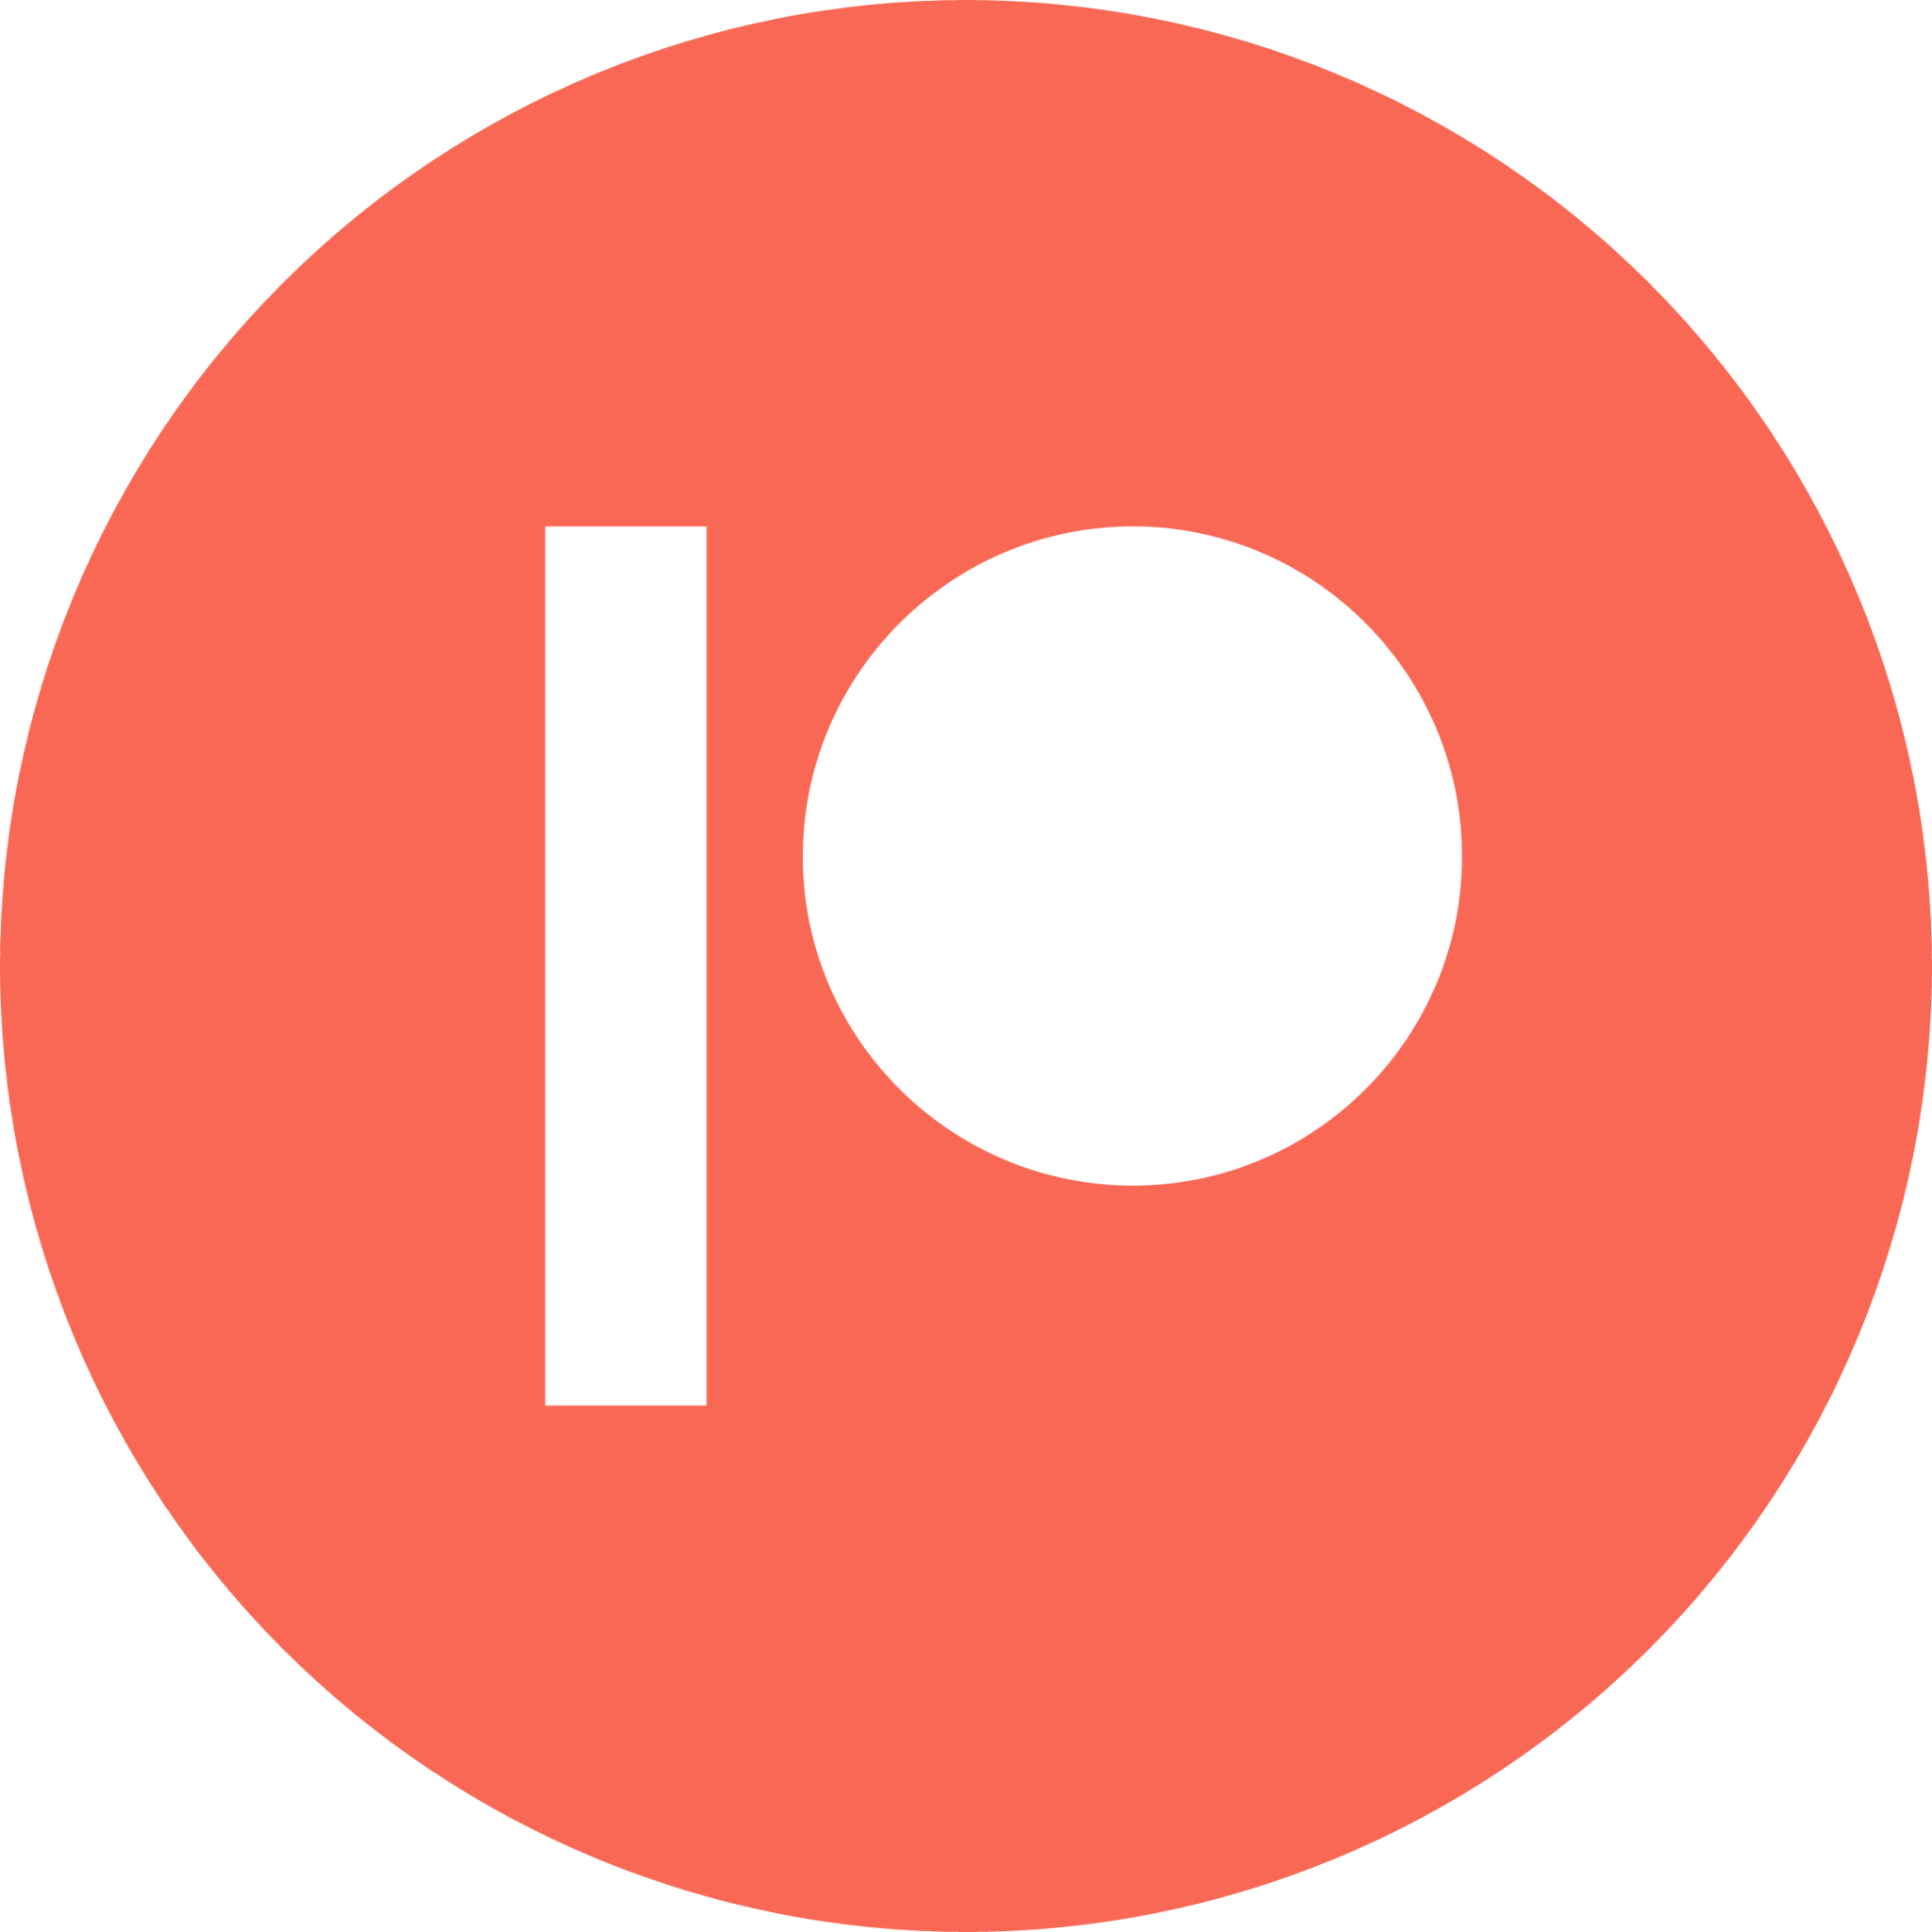 Patreon" Icon - Download for free – Iconduck